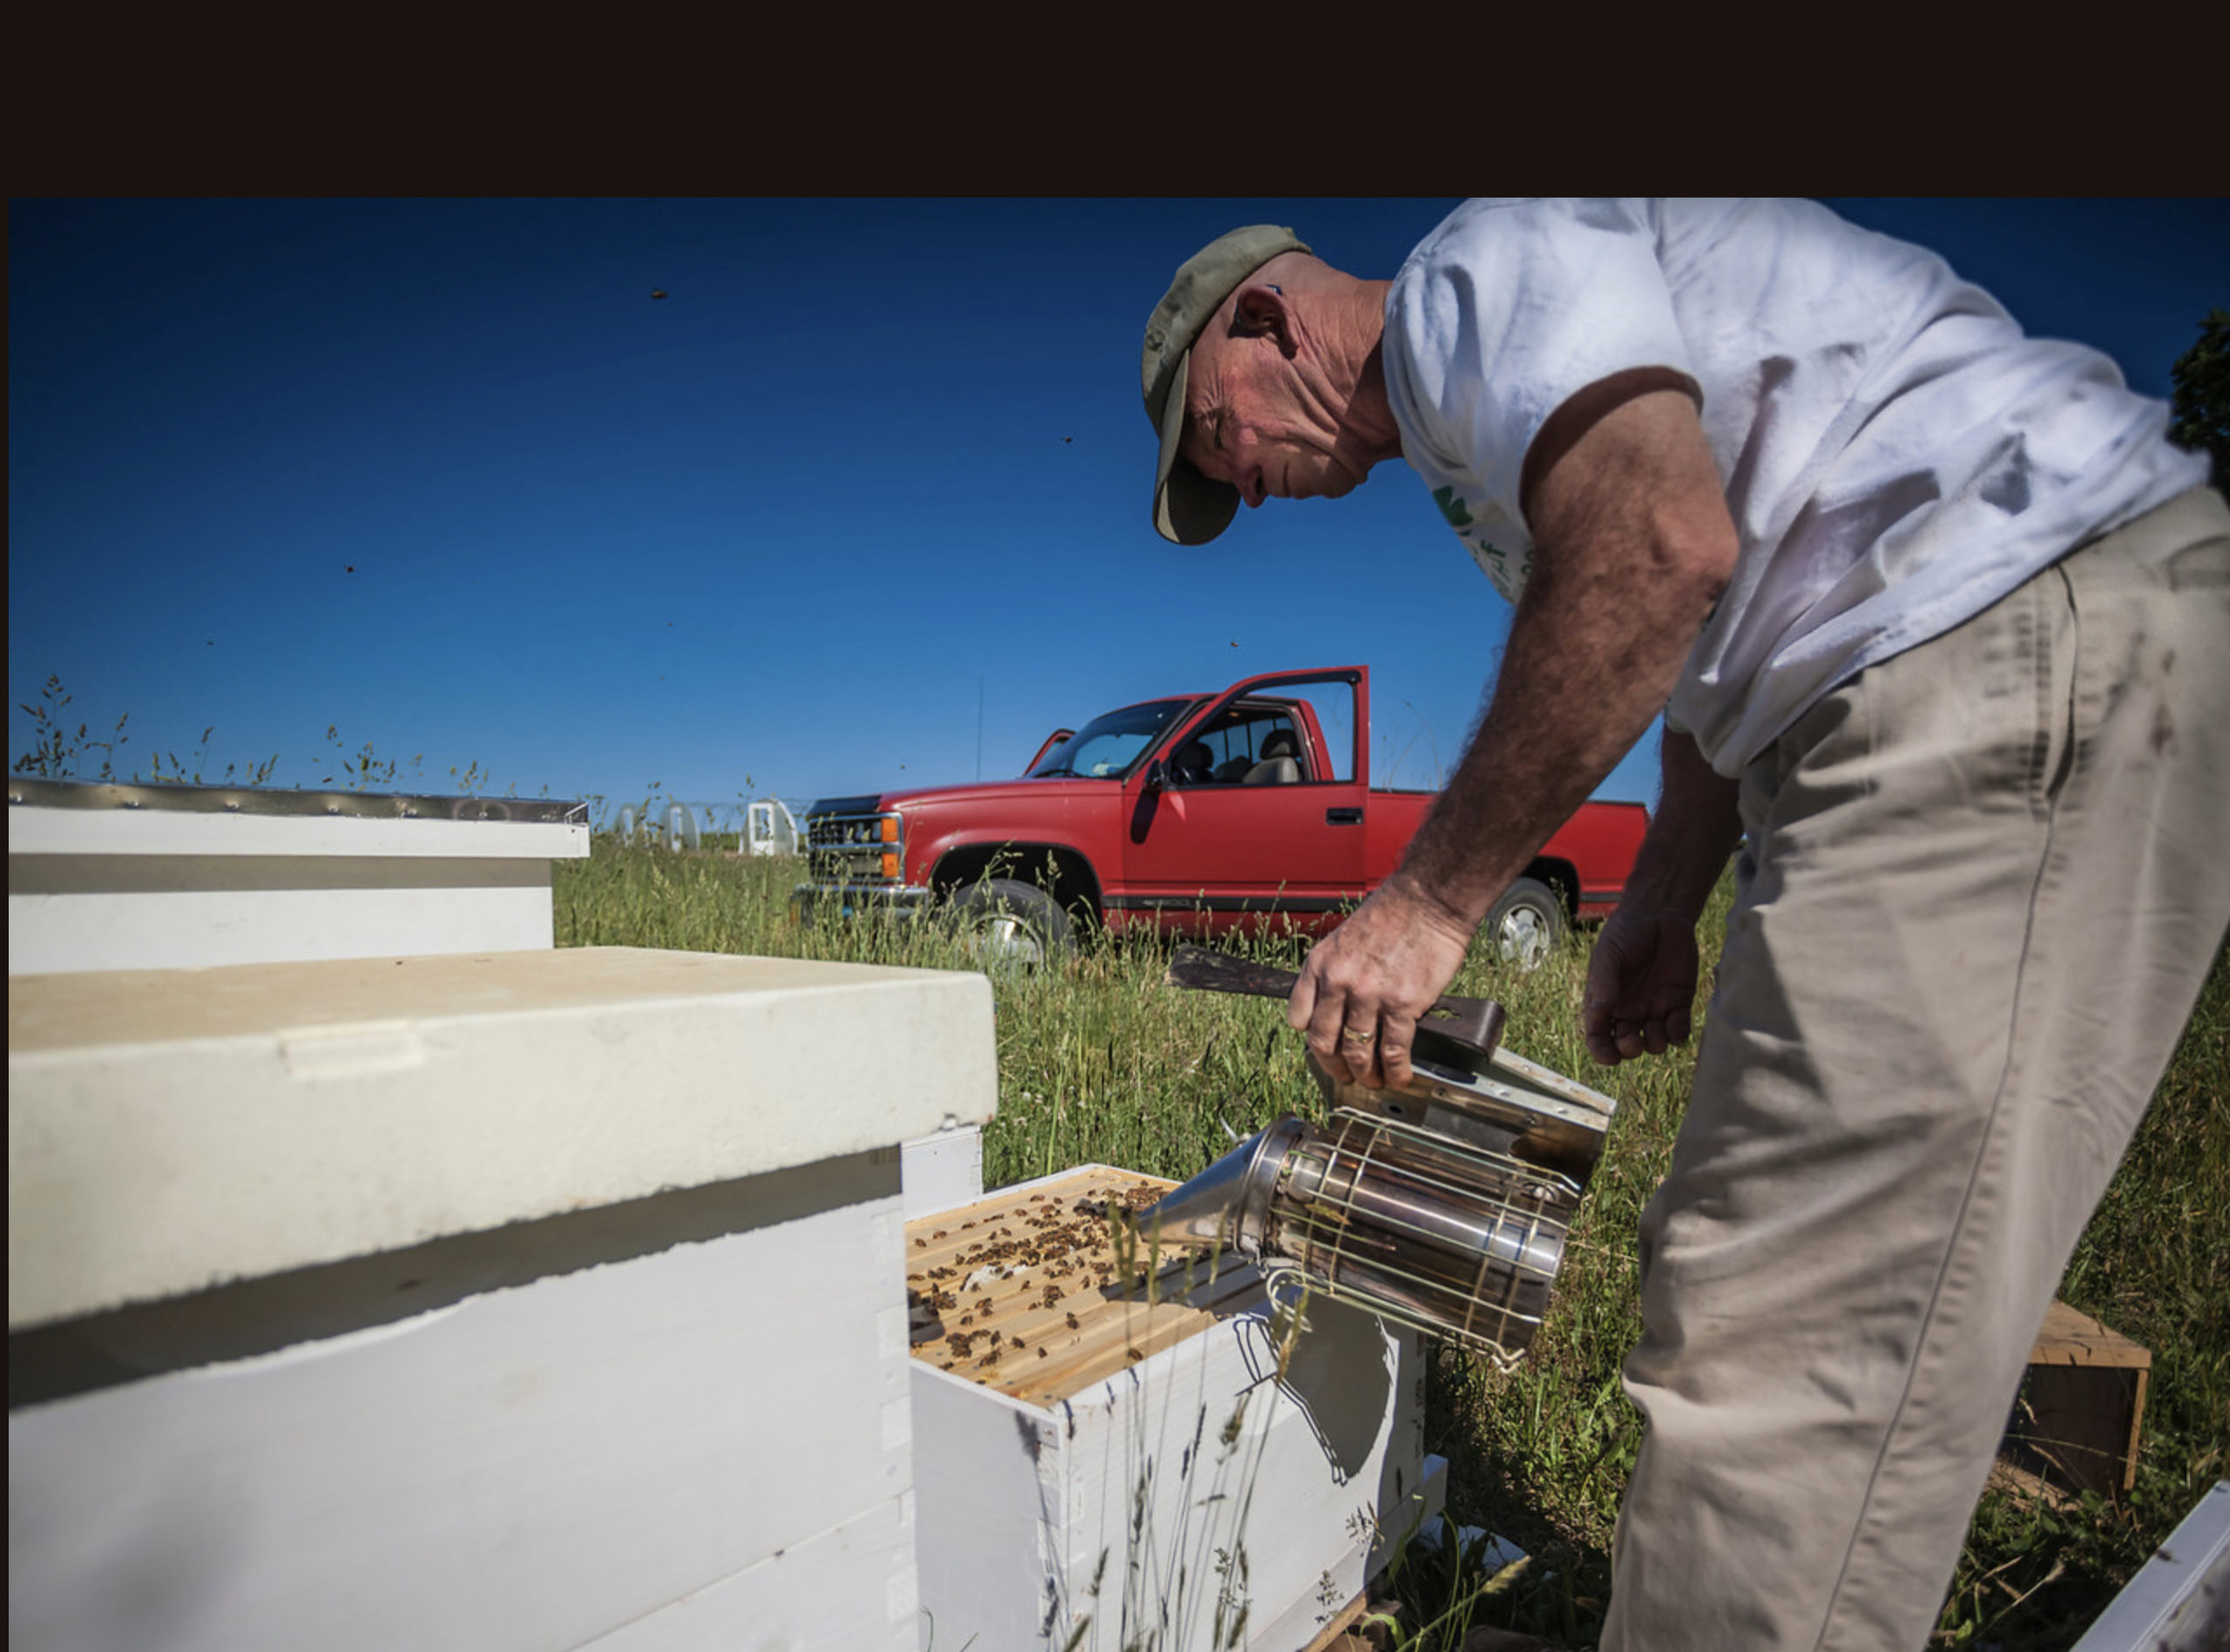 Chris Kelly checking on one of his hives. IAN VORSTER